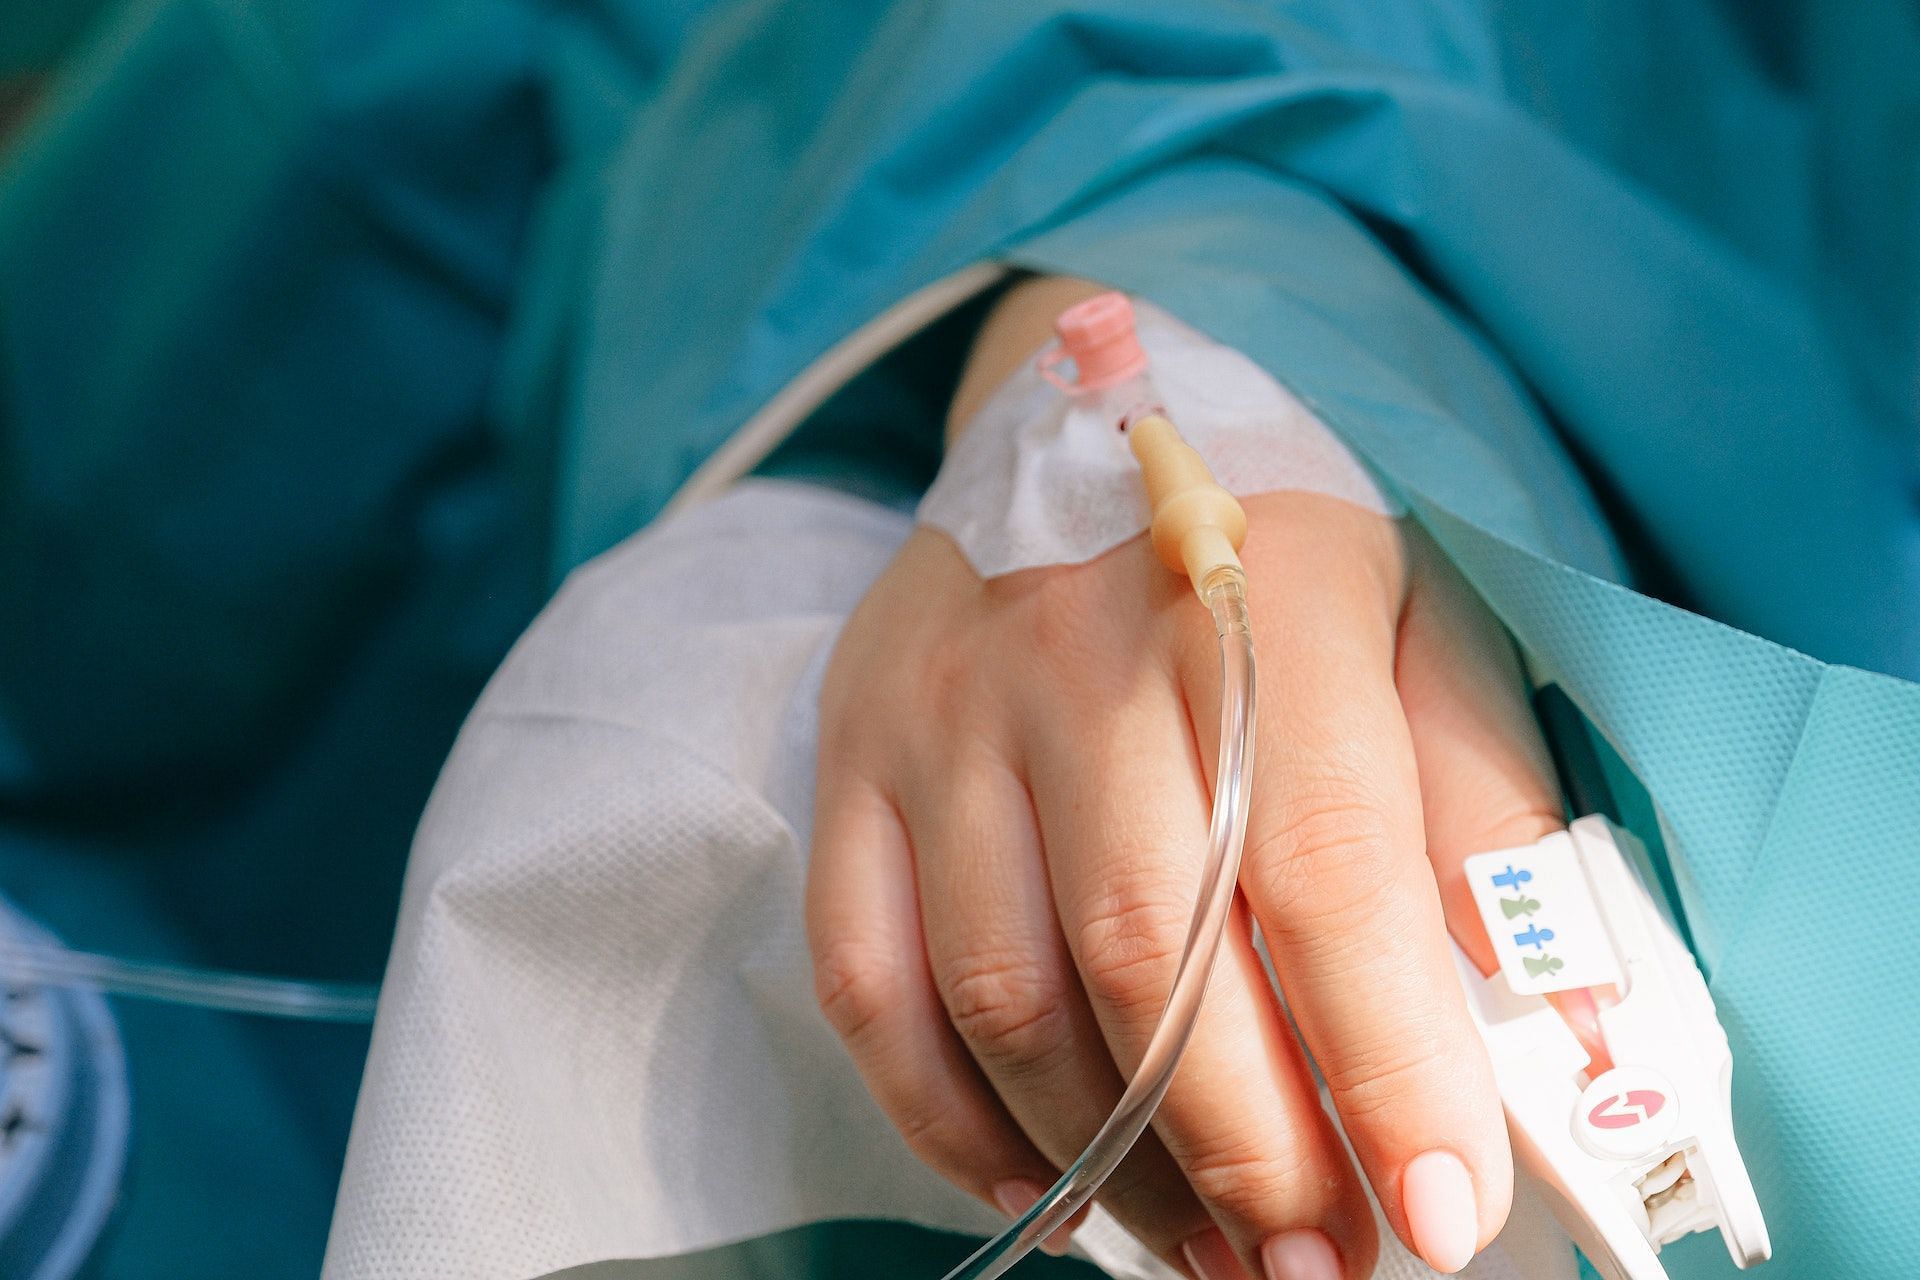 IV can be given to serious patients with low blood oxygen. (Photo via Pexels/Anna Shvets)